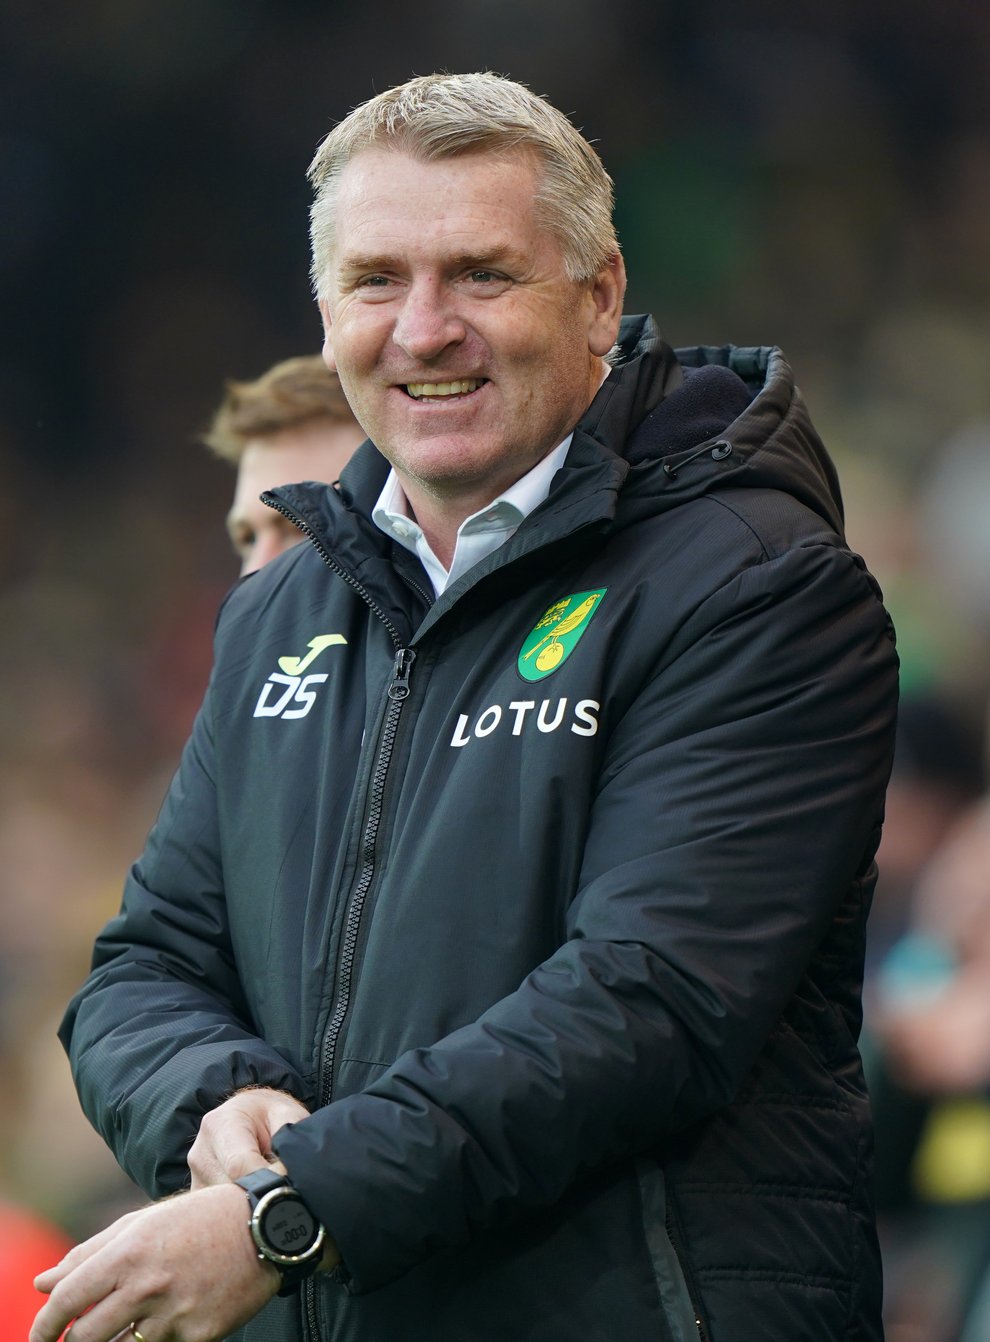 Norwich head coach Dean Smith intends to stay positive heading into the final two matches of a forgettable Premier League campaign (Joe Giddens/PA)